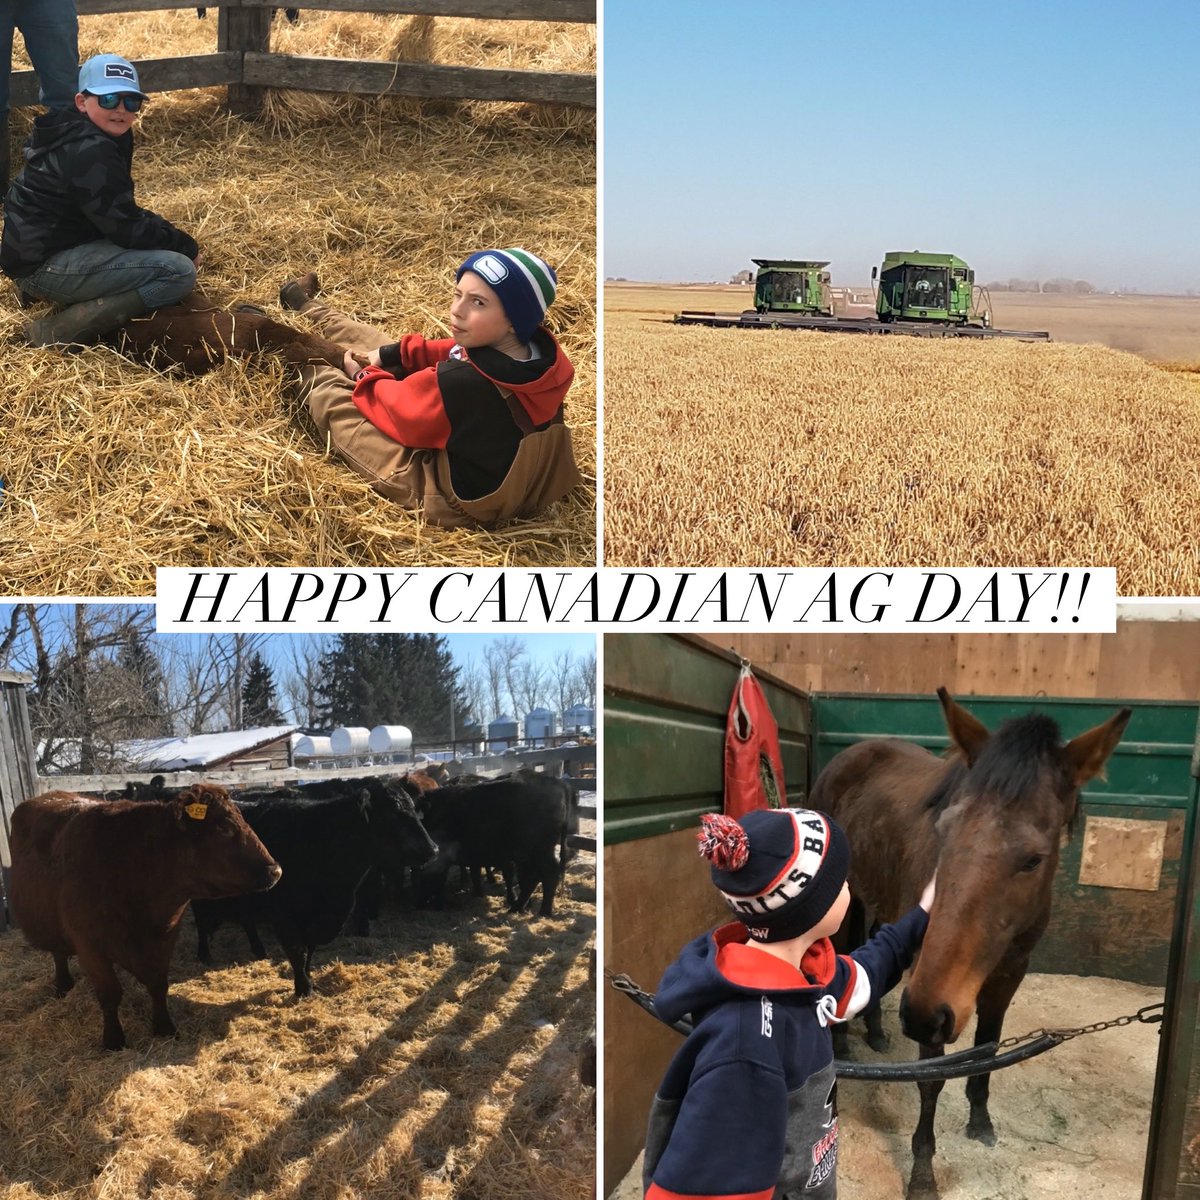 Happy Canadian Agriculture Day!!! Blessed to be a part of Agriculture in Canada!!  
#canadianagday #agriculturecanada #canadianagriculture #RAWFarms #albertaag #CdnAgDay @ChinookFin 
#aglender #farmwife #farmlife #agproud